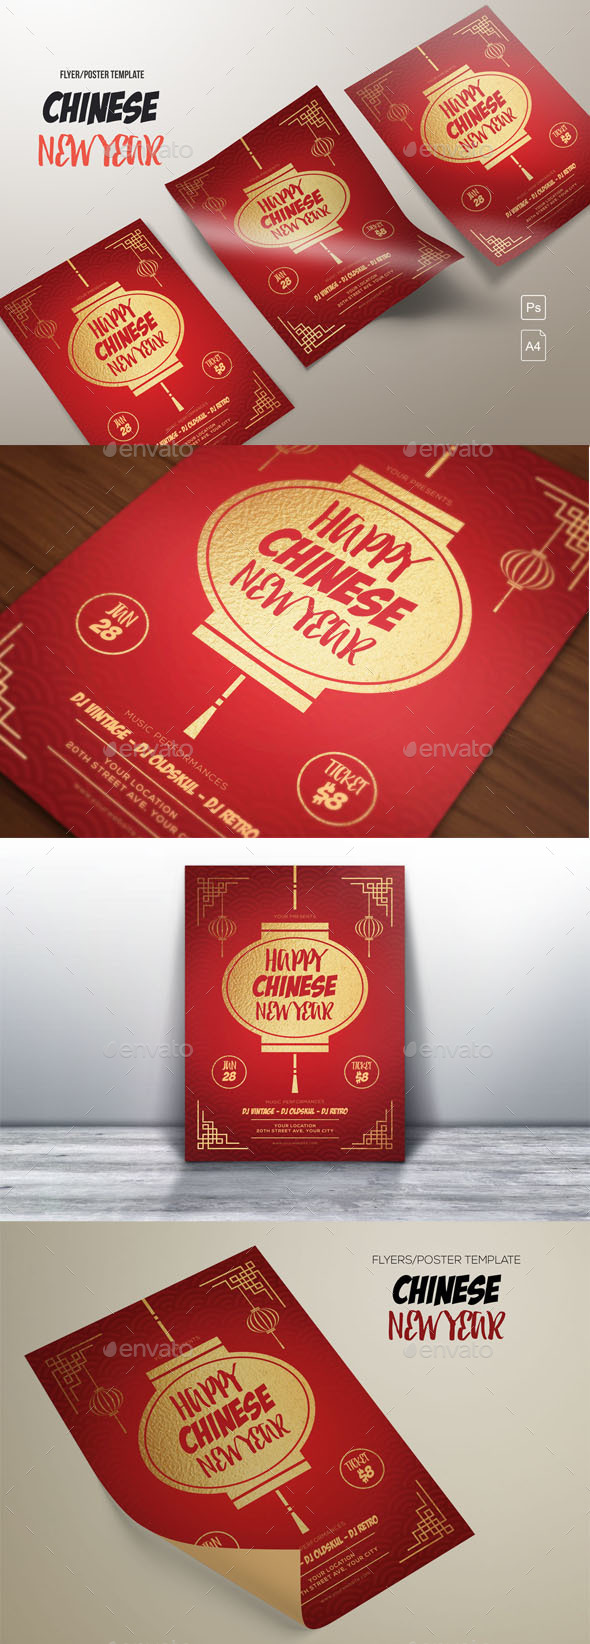 Chinese New Year Flyers/Poster